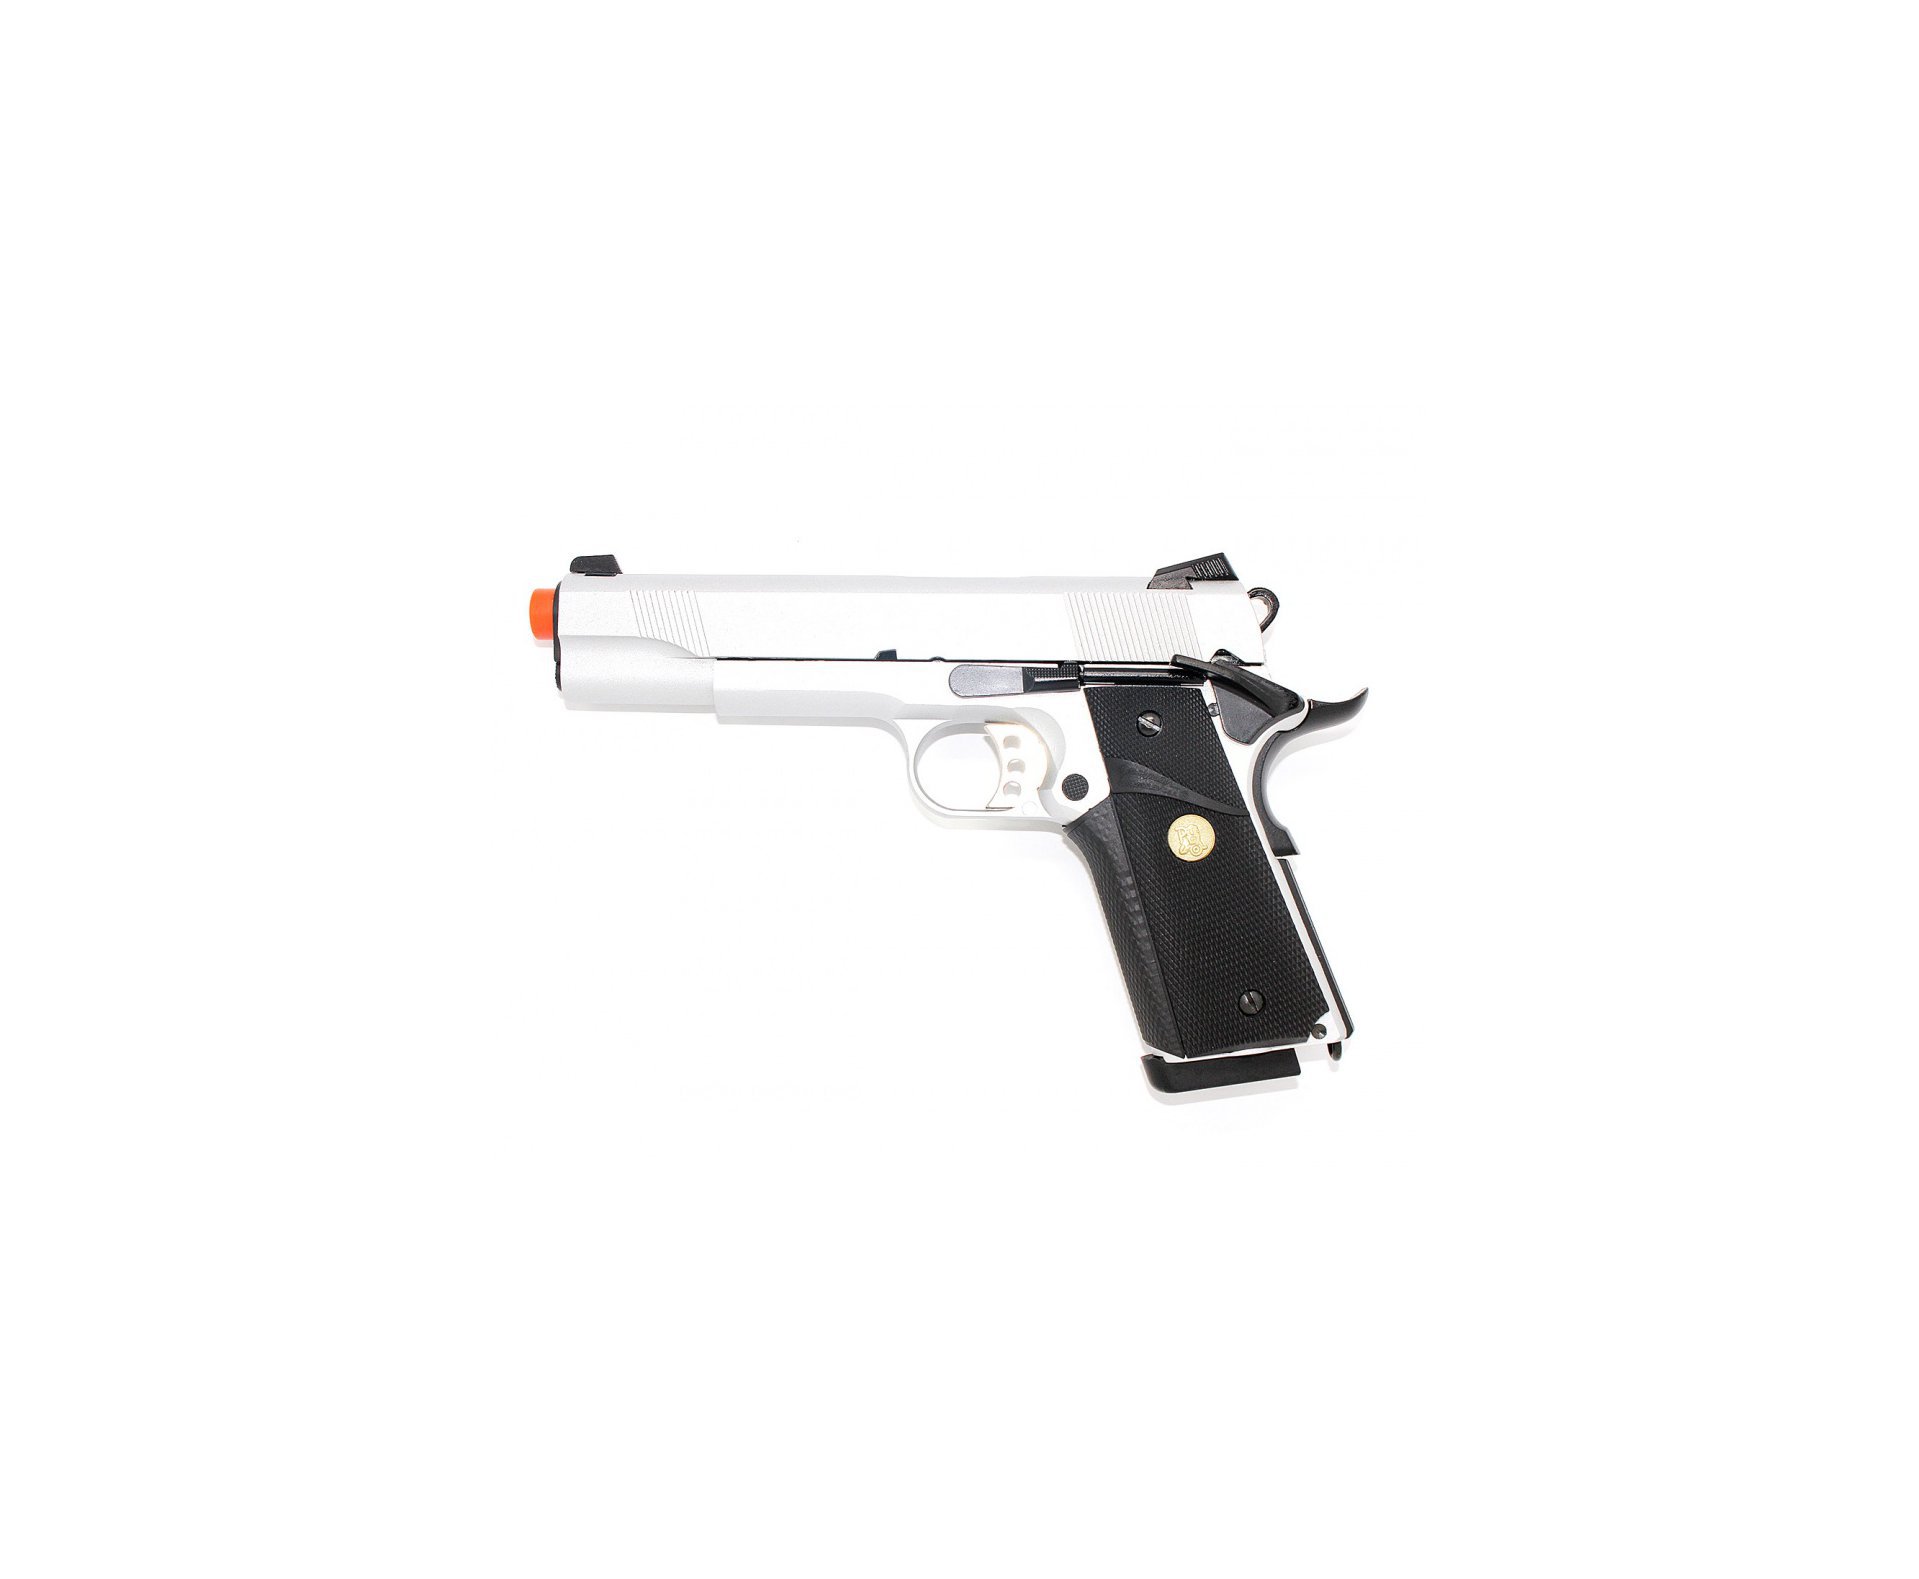 Pistola Airsoft Gas Gbb M1911 Inox Double Bell 728y Blowback 6.0 + Case + Gbb + Bbs 0,20g